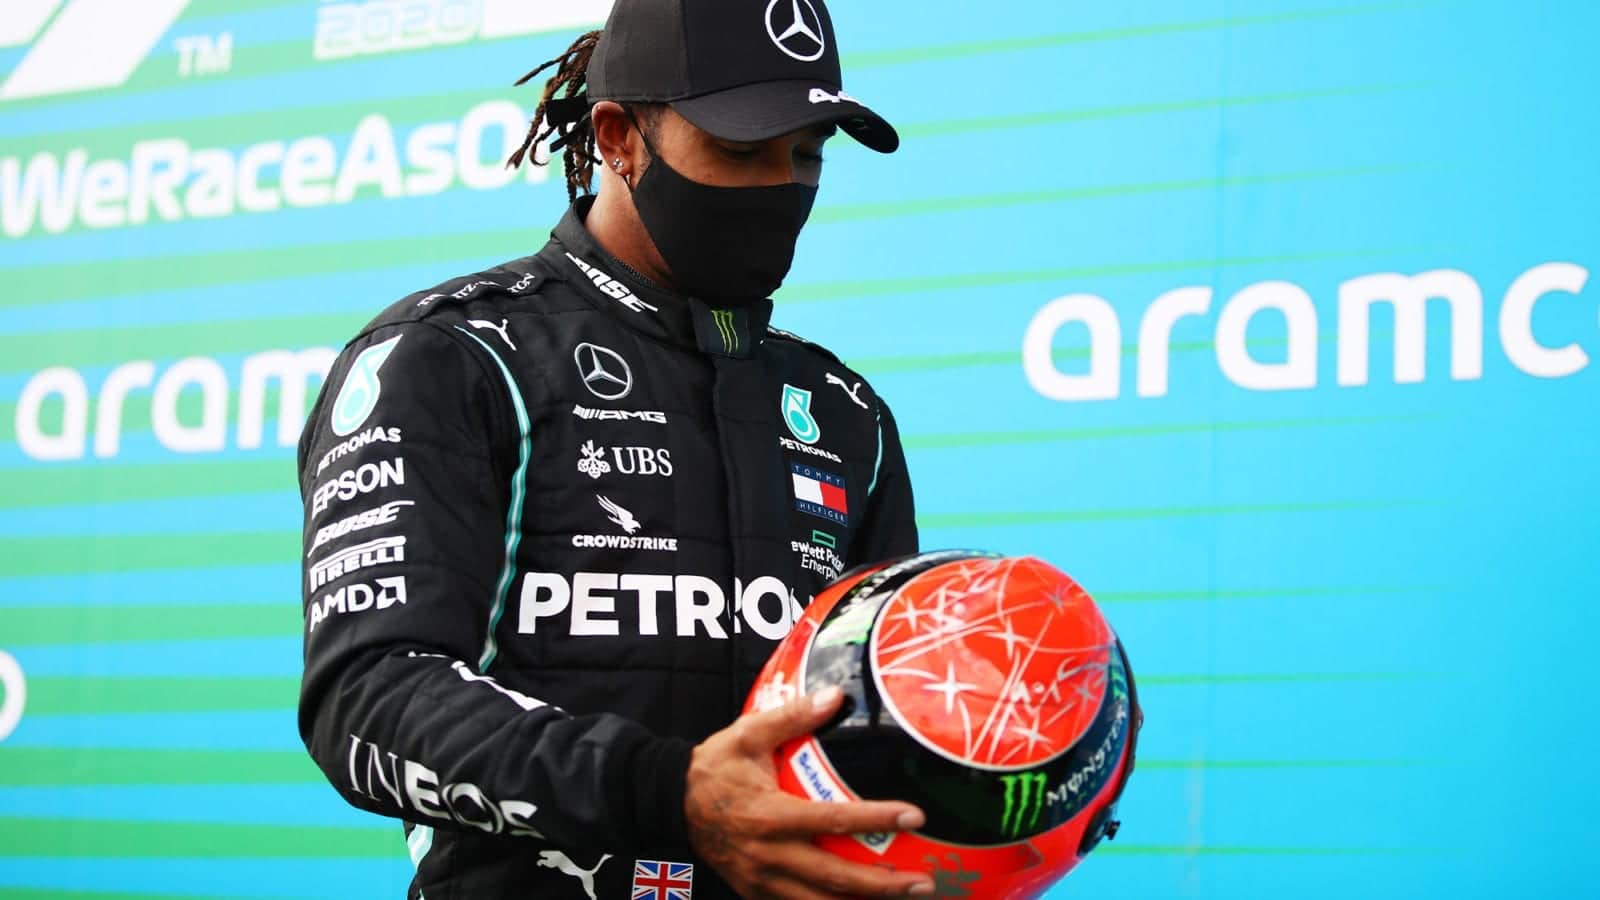 Lewis Hamilton holds one of Michael Schumacher's helmets presented to him after equalling the 91 F1 win record at the 2020 Eifel Grand Prix at the Nurburgring